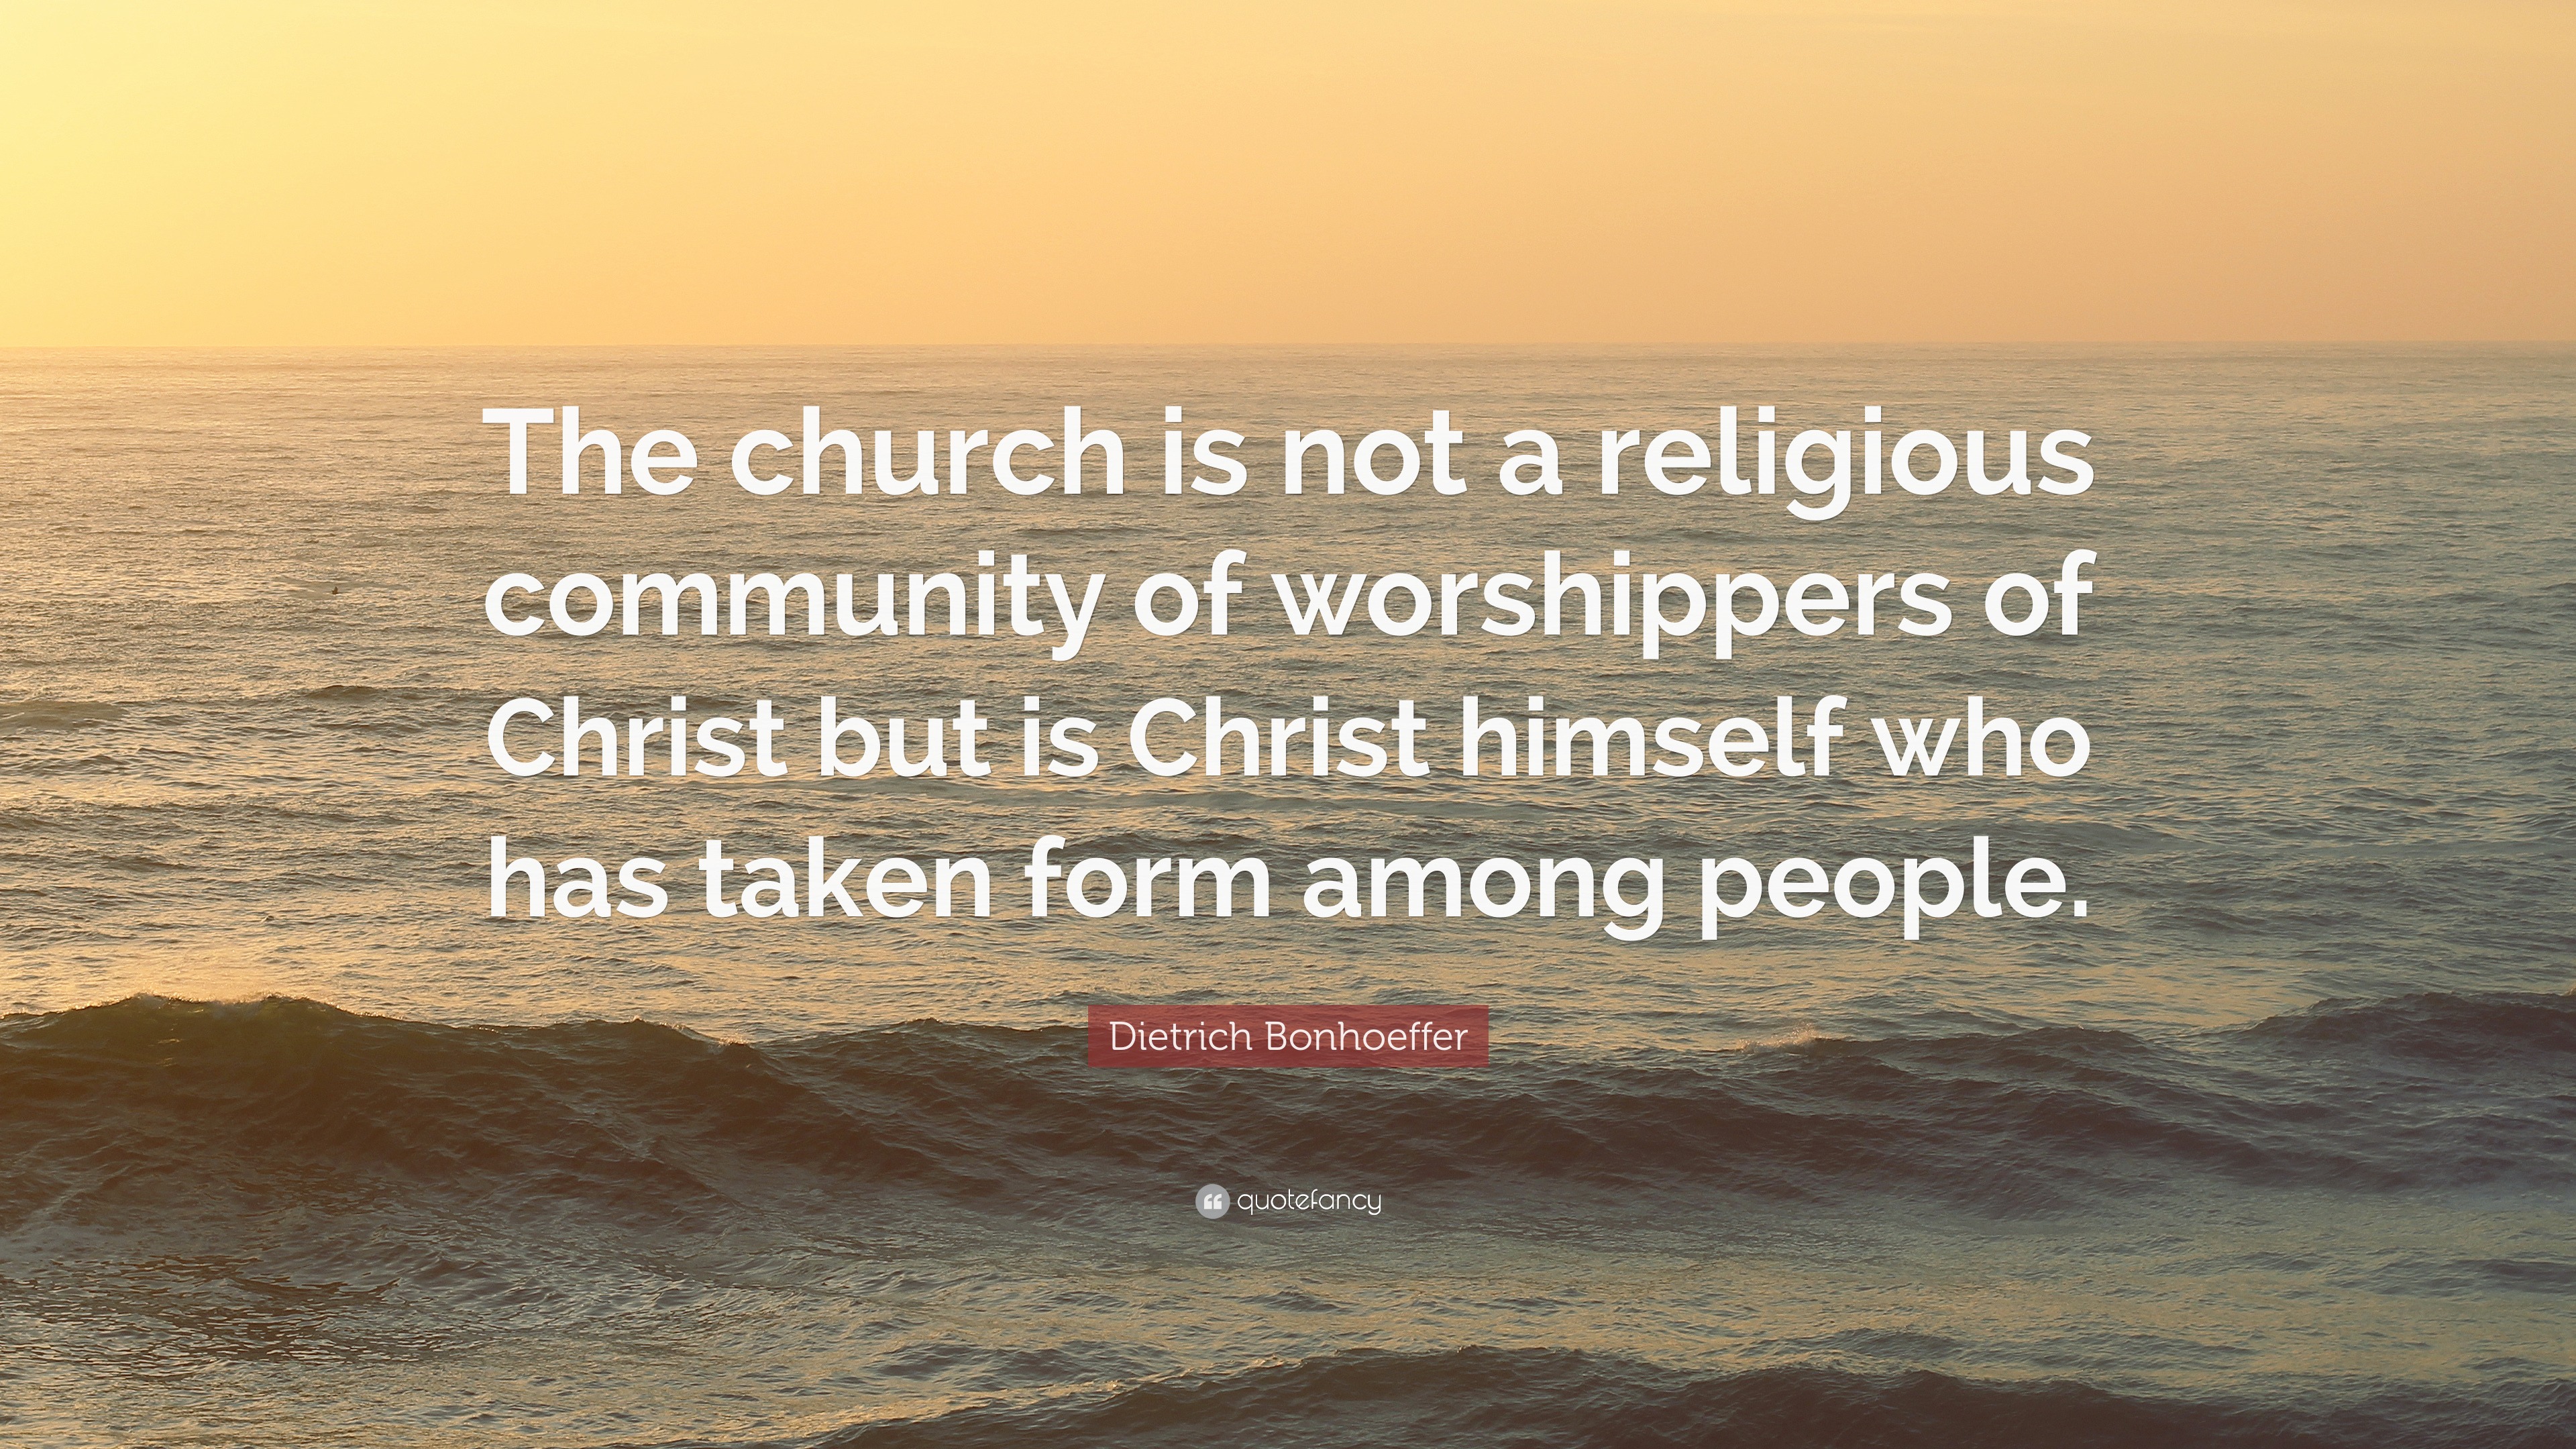 Dietrich Bonhoeffer Quote “The church is not a religious